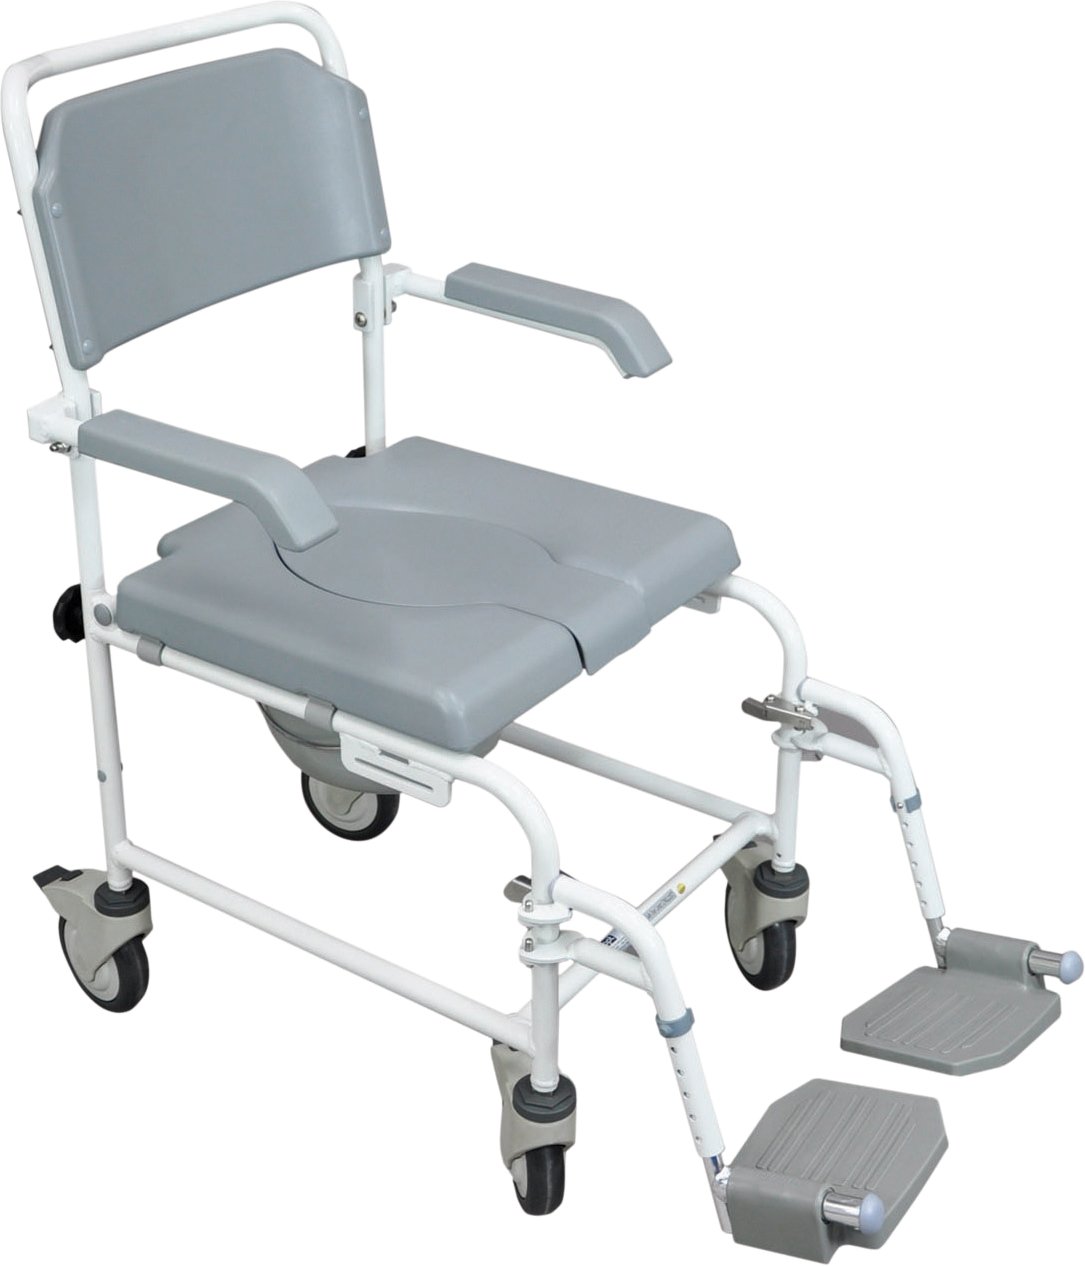 attendent-propelled-shower-commode-chair